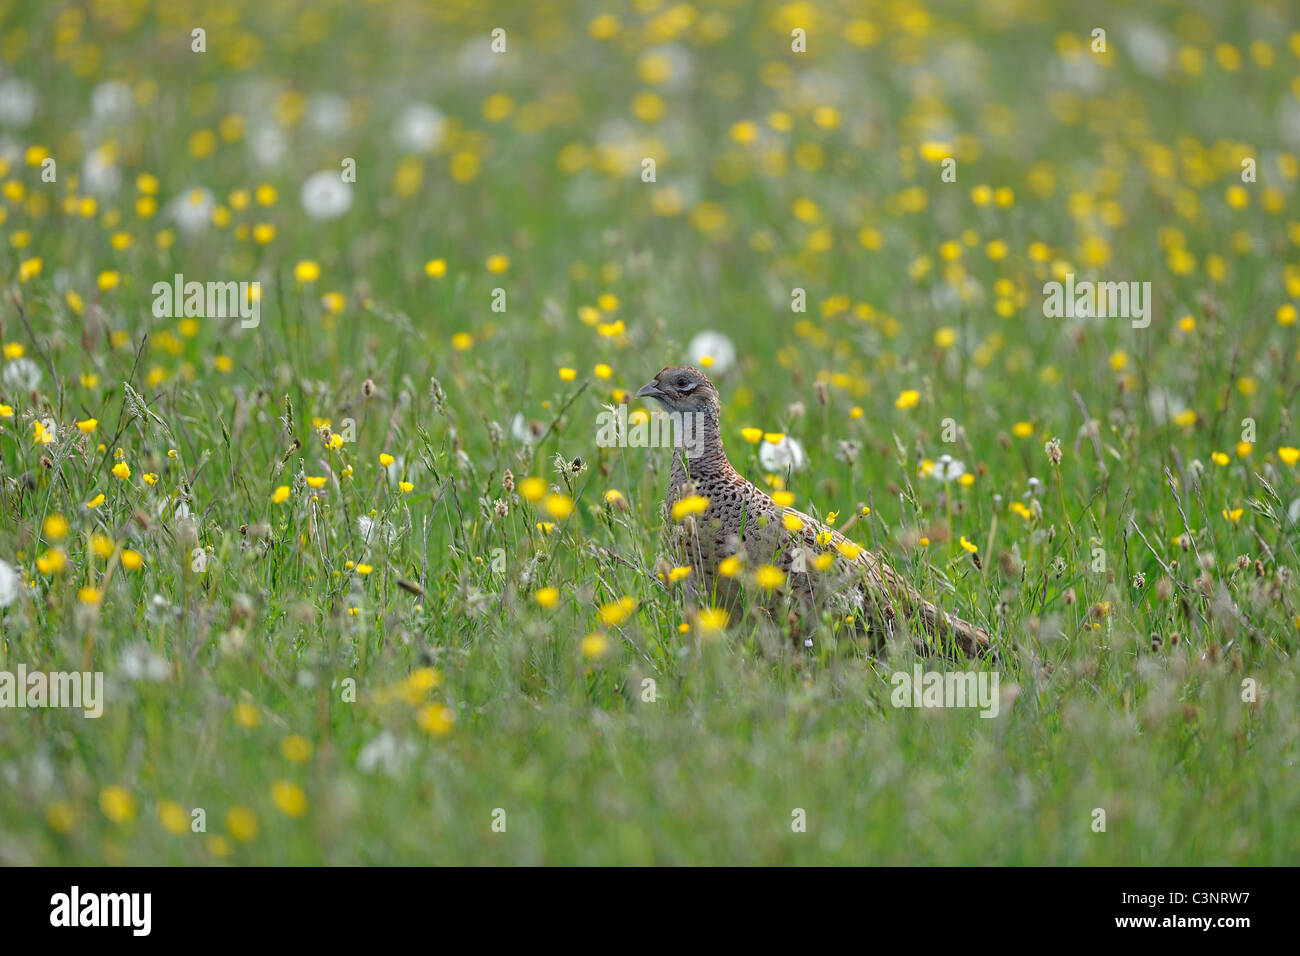 Common pheasant - Ring-necked pheasant (Phasianus colchicus) female standing in a flowering meadow at spring Stock Photo